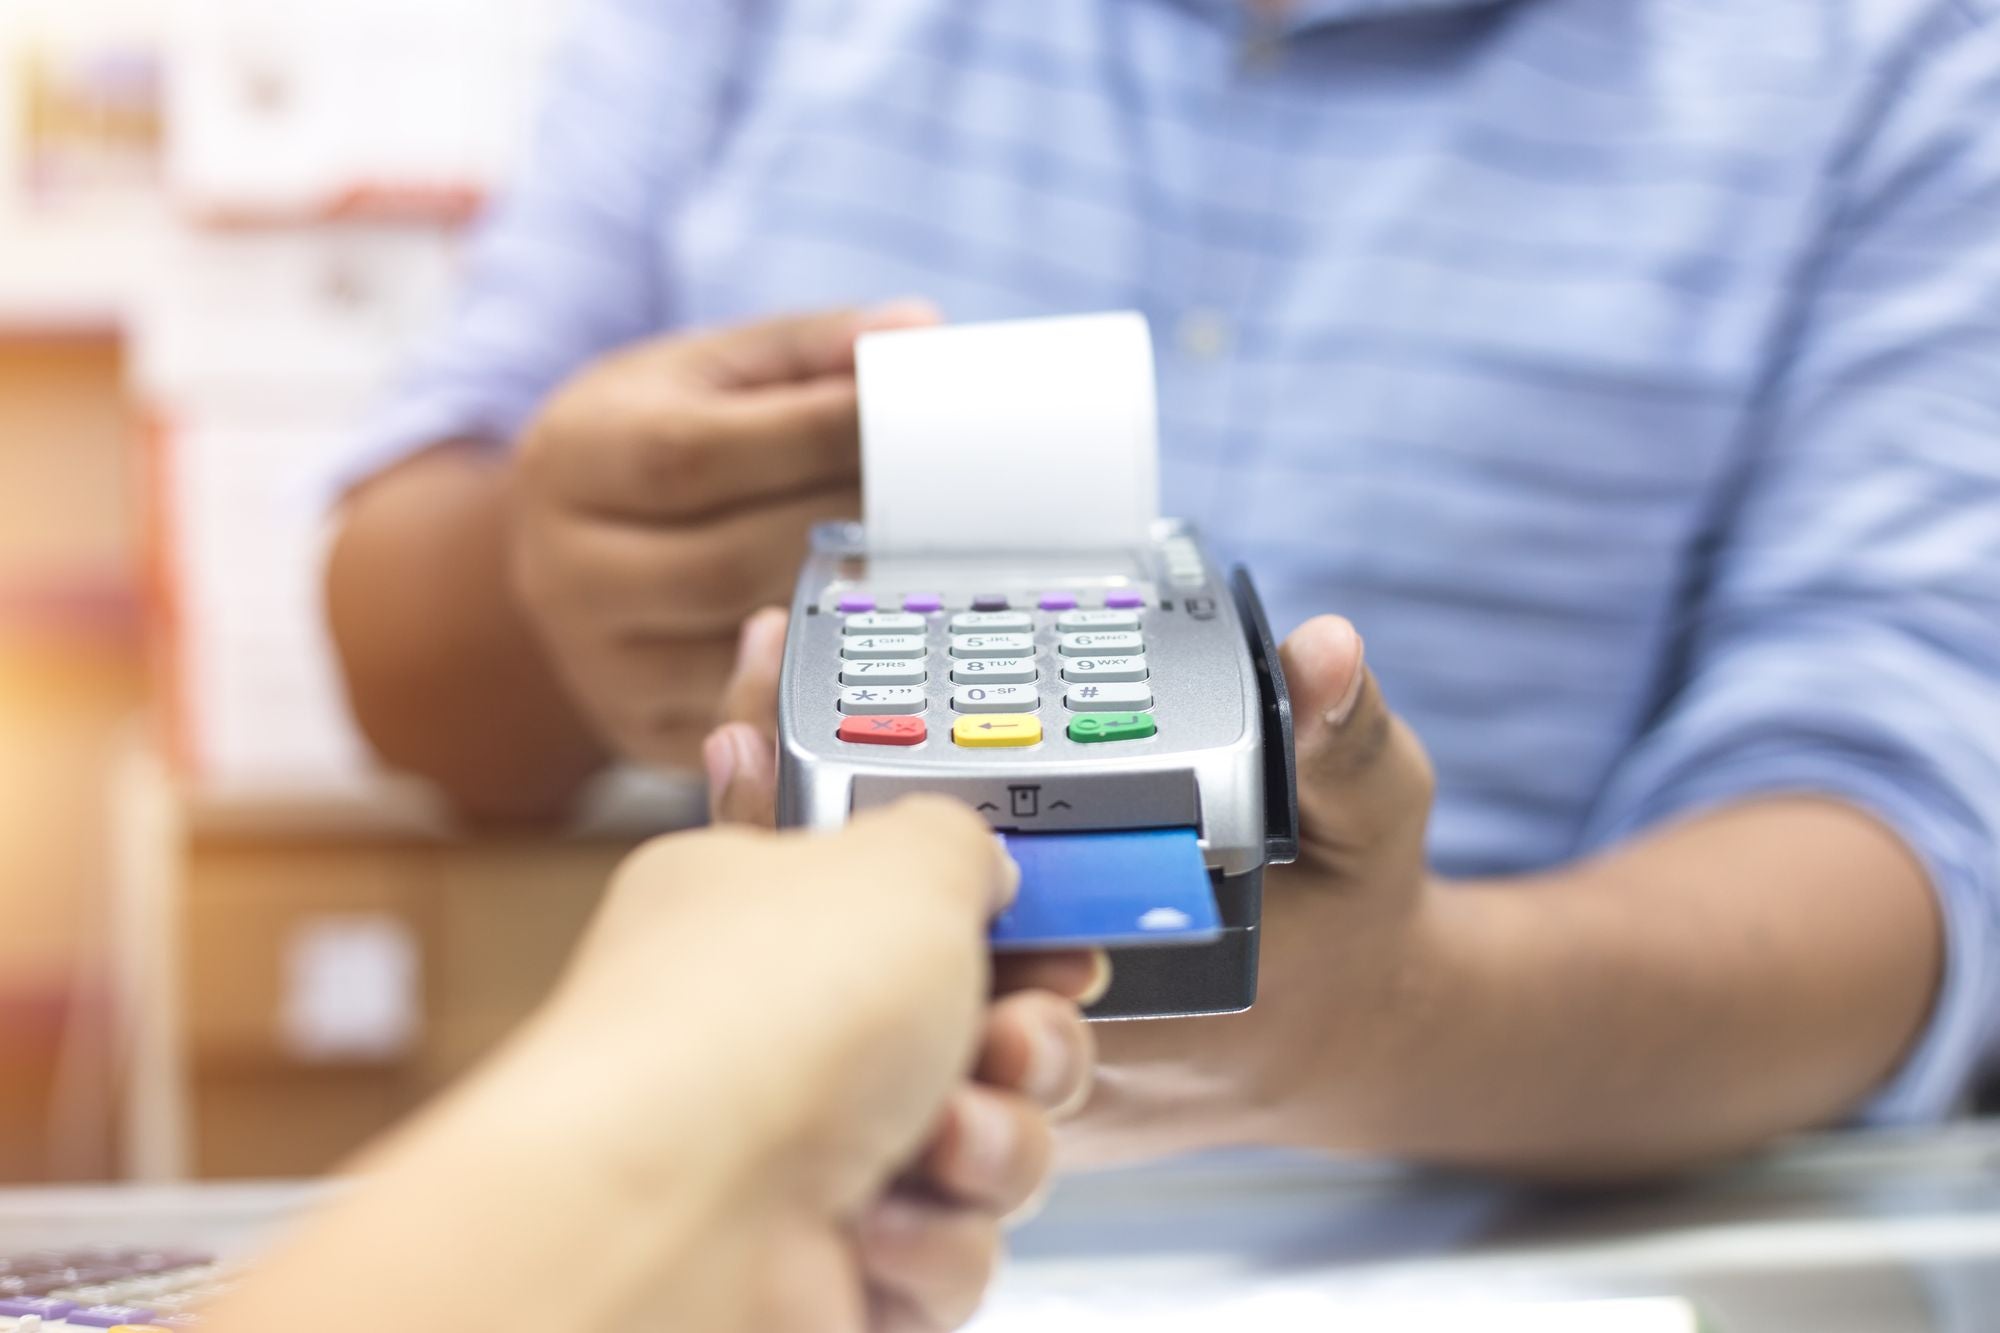 Top 10 Cheapest Credit Card Processing Companies for Small Business